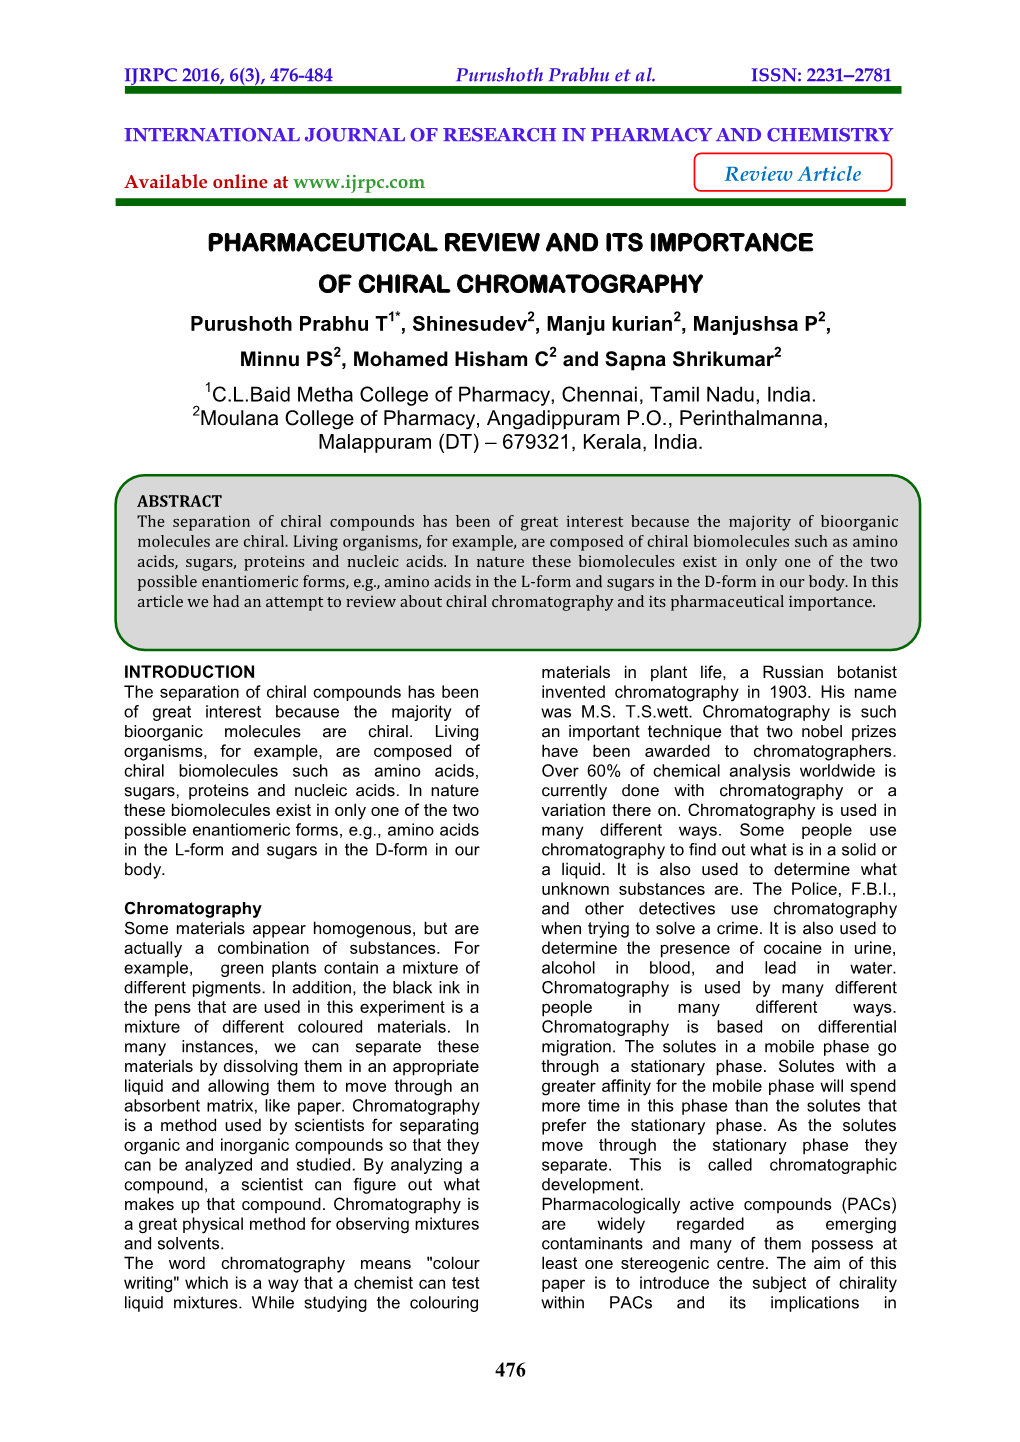 Pharmaceutical Review and Its Importance of Chiral